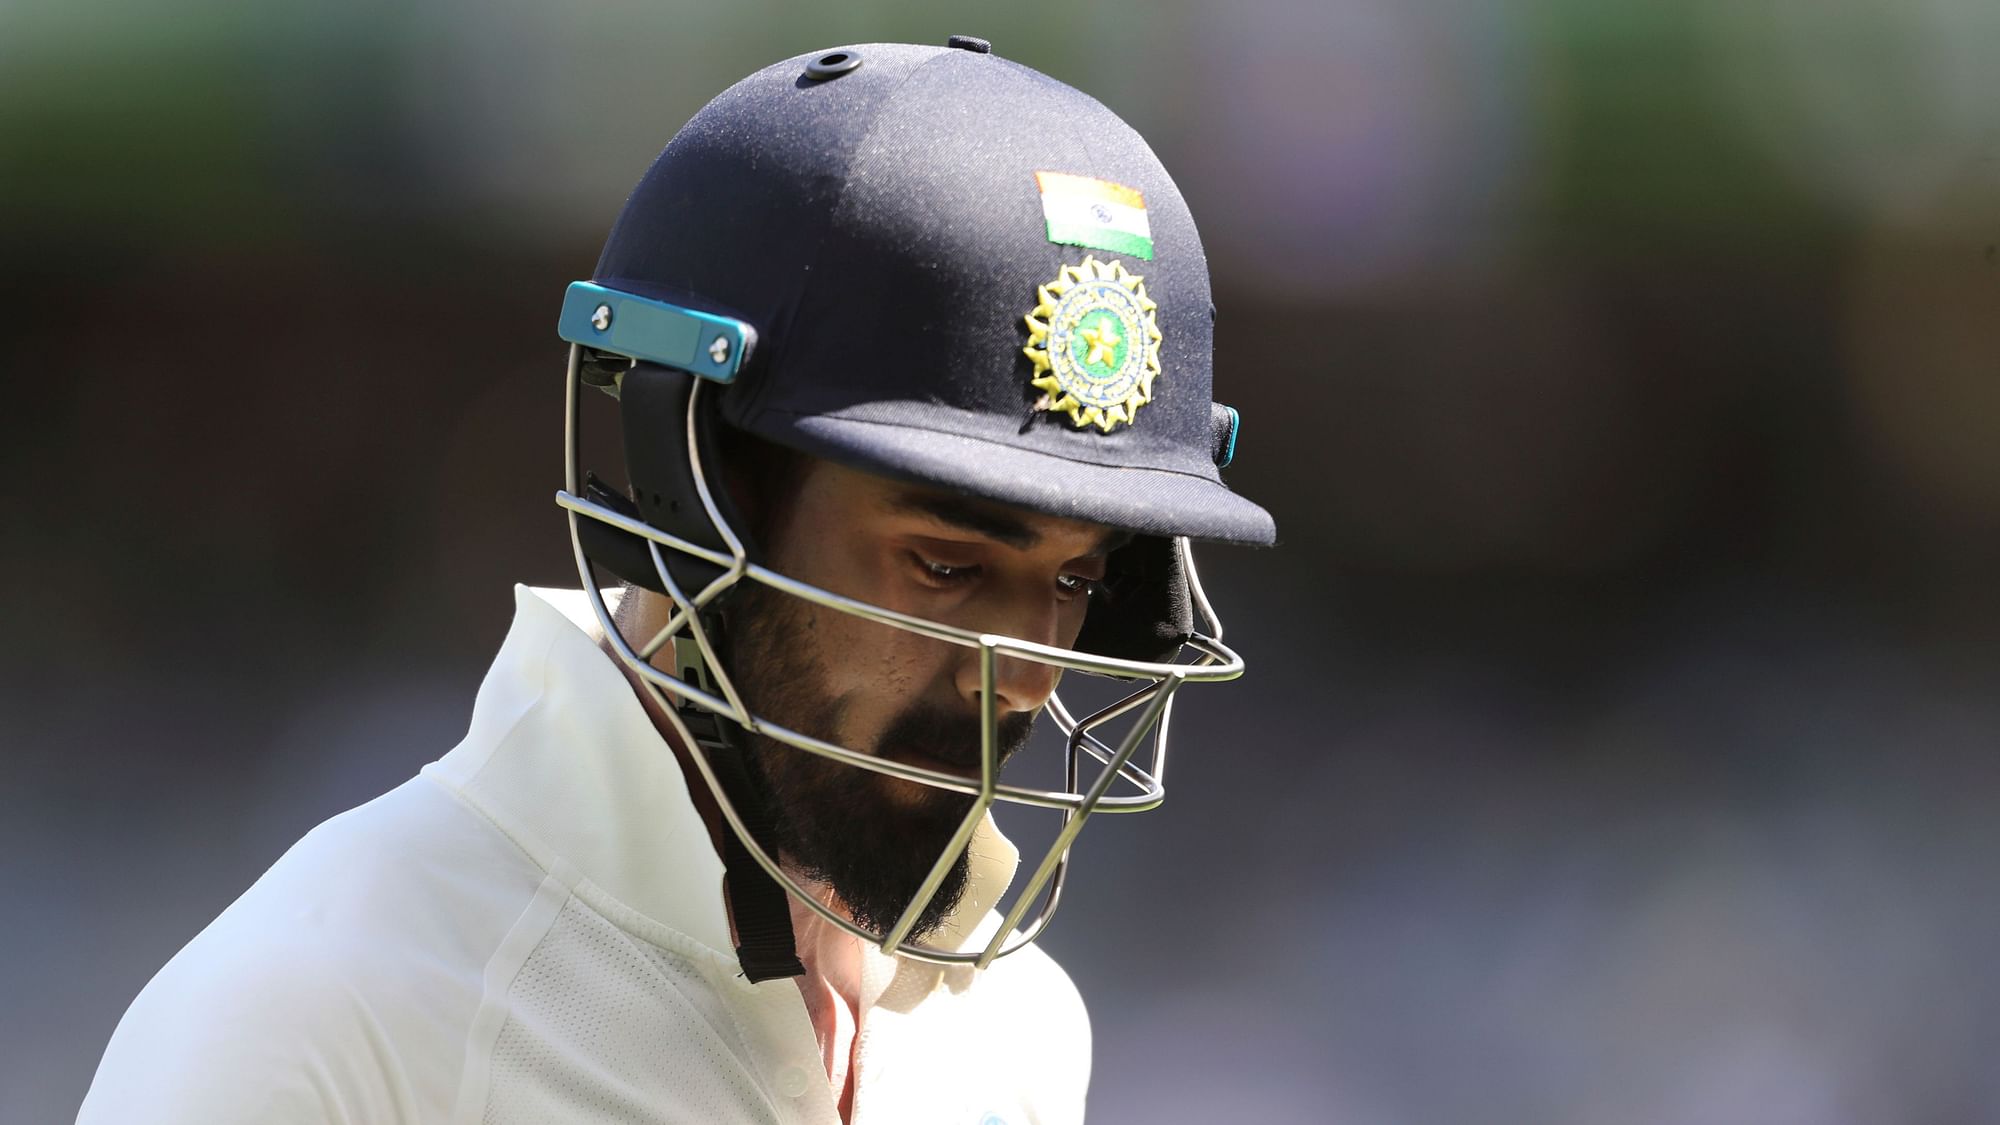 Making a comeback into the squad after being dropped for the Melbourne Test, KL Rahul fell in the second over of the Indian innings on Day 1 in Sydney.